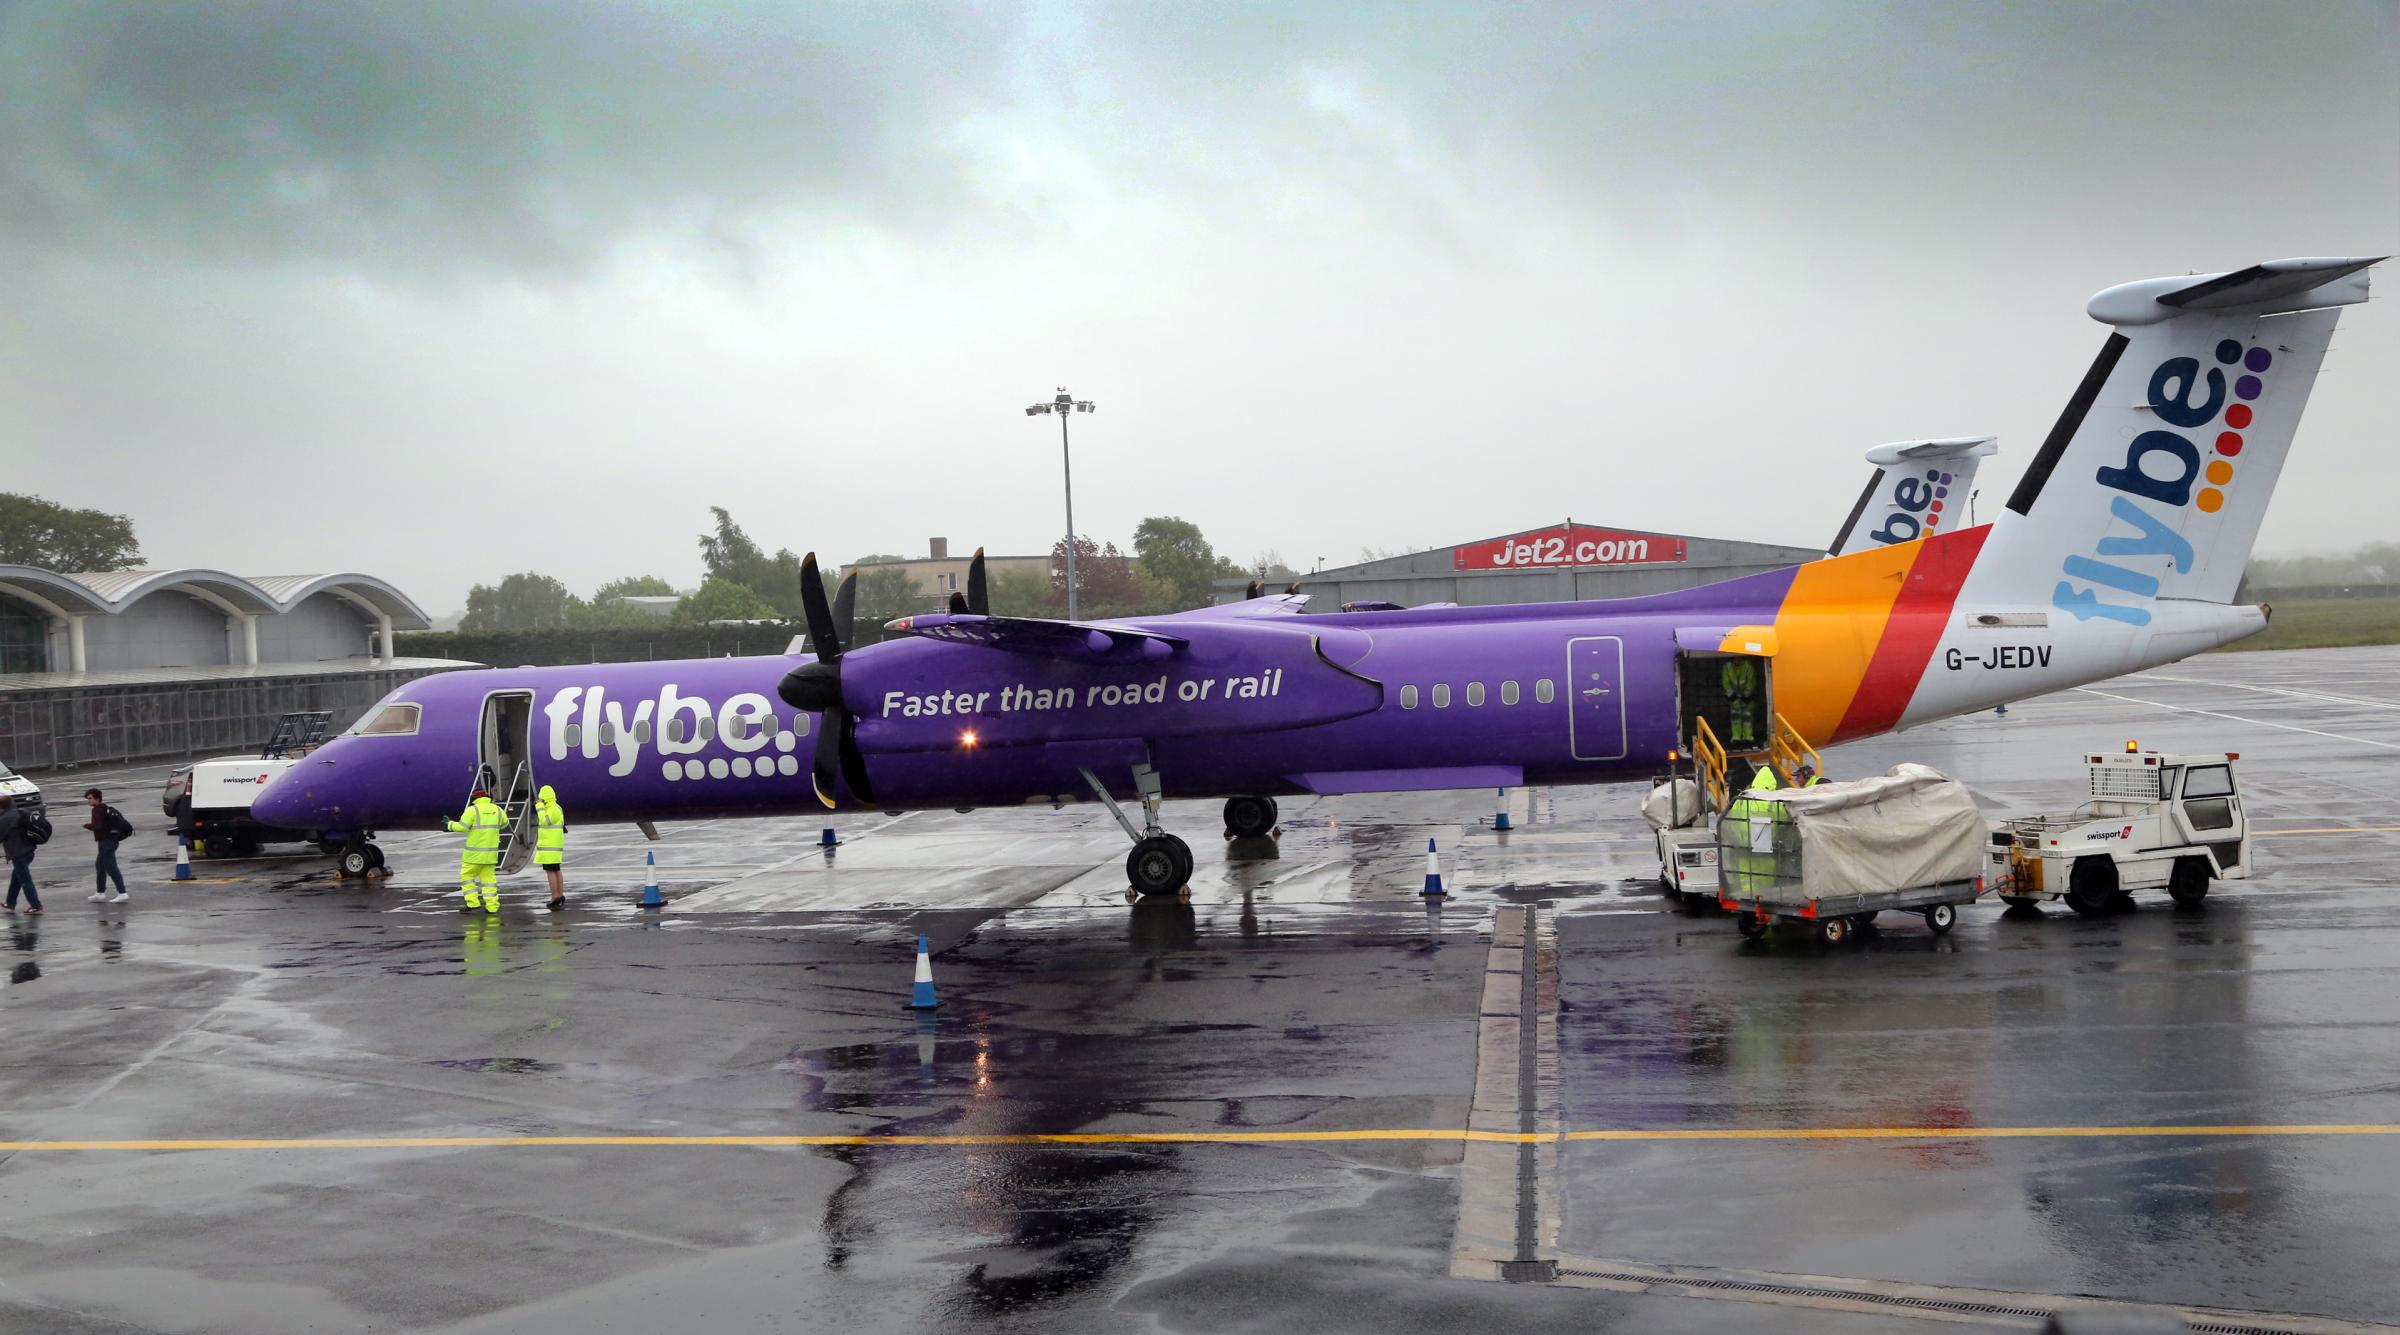 flybe bristol to jersey